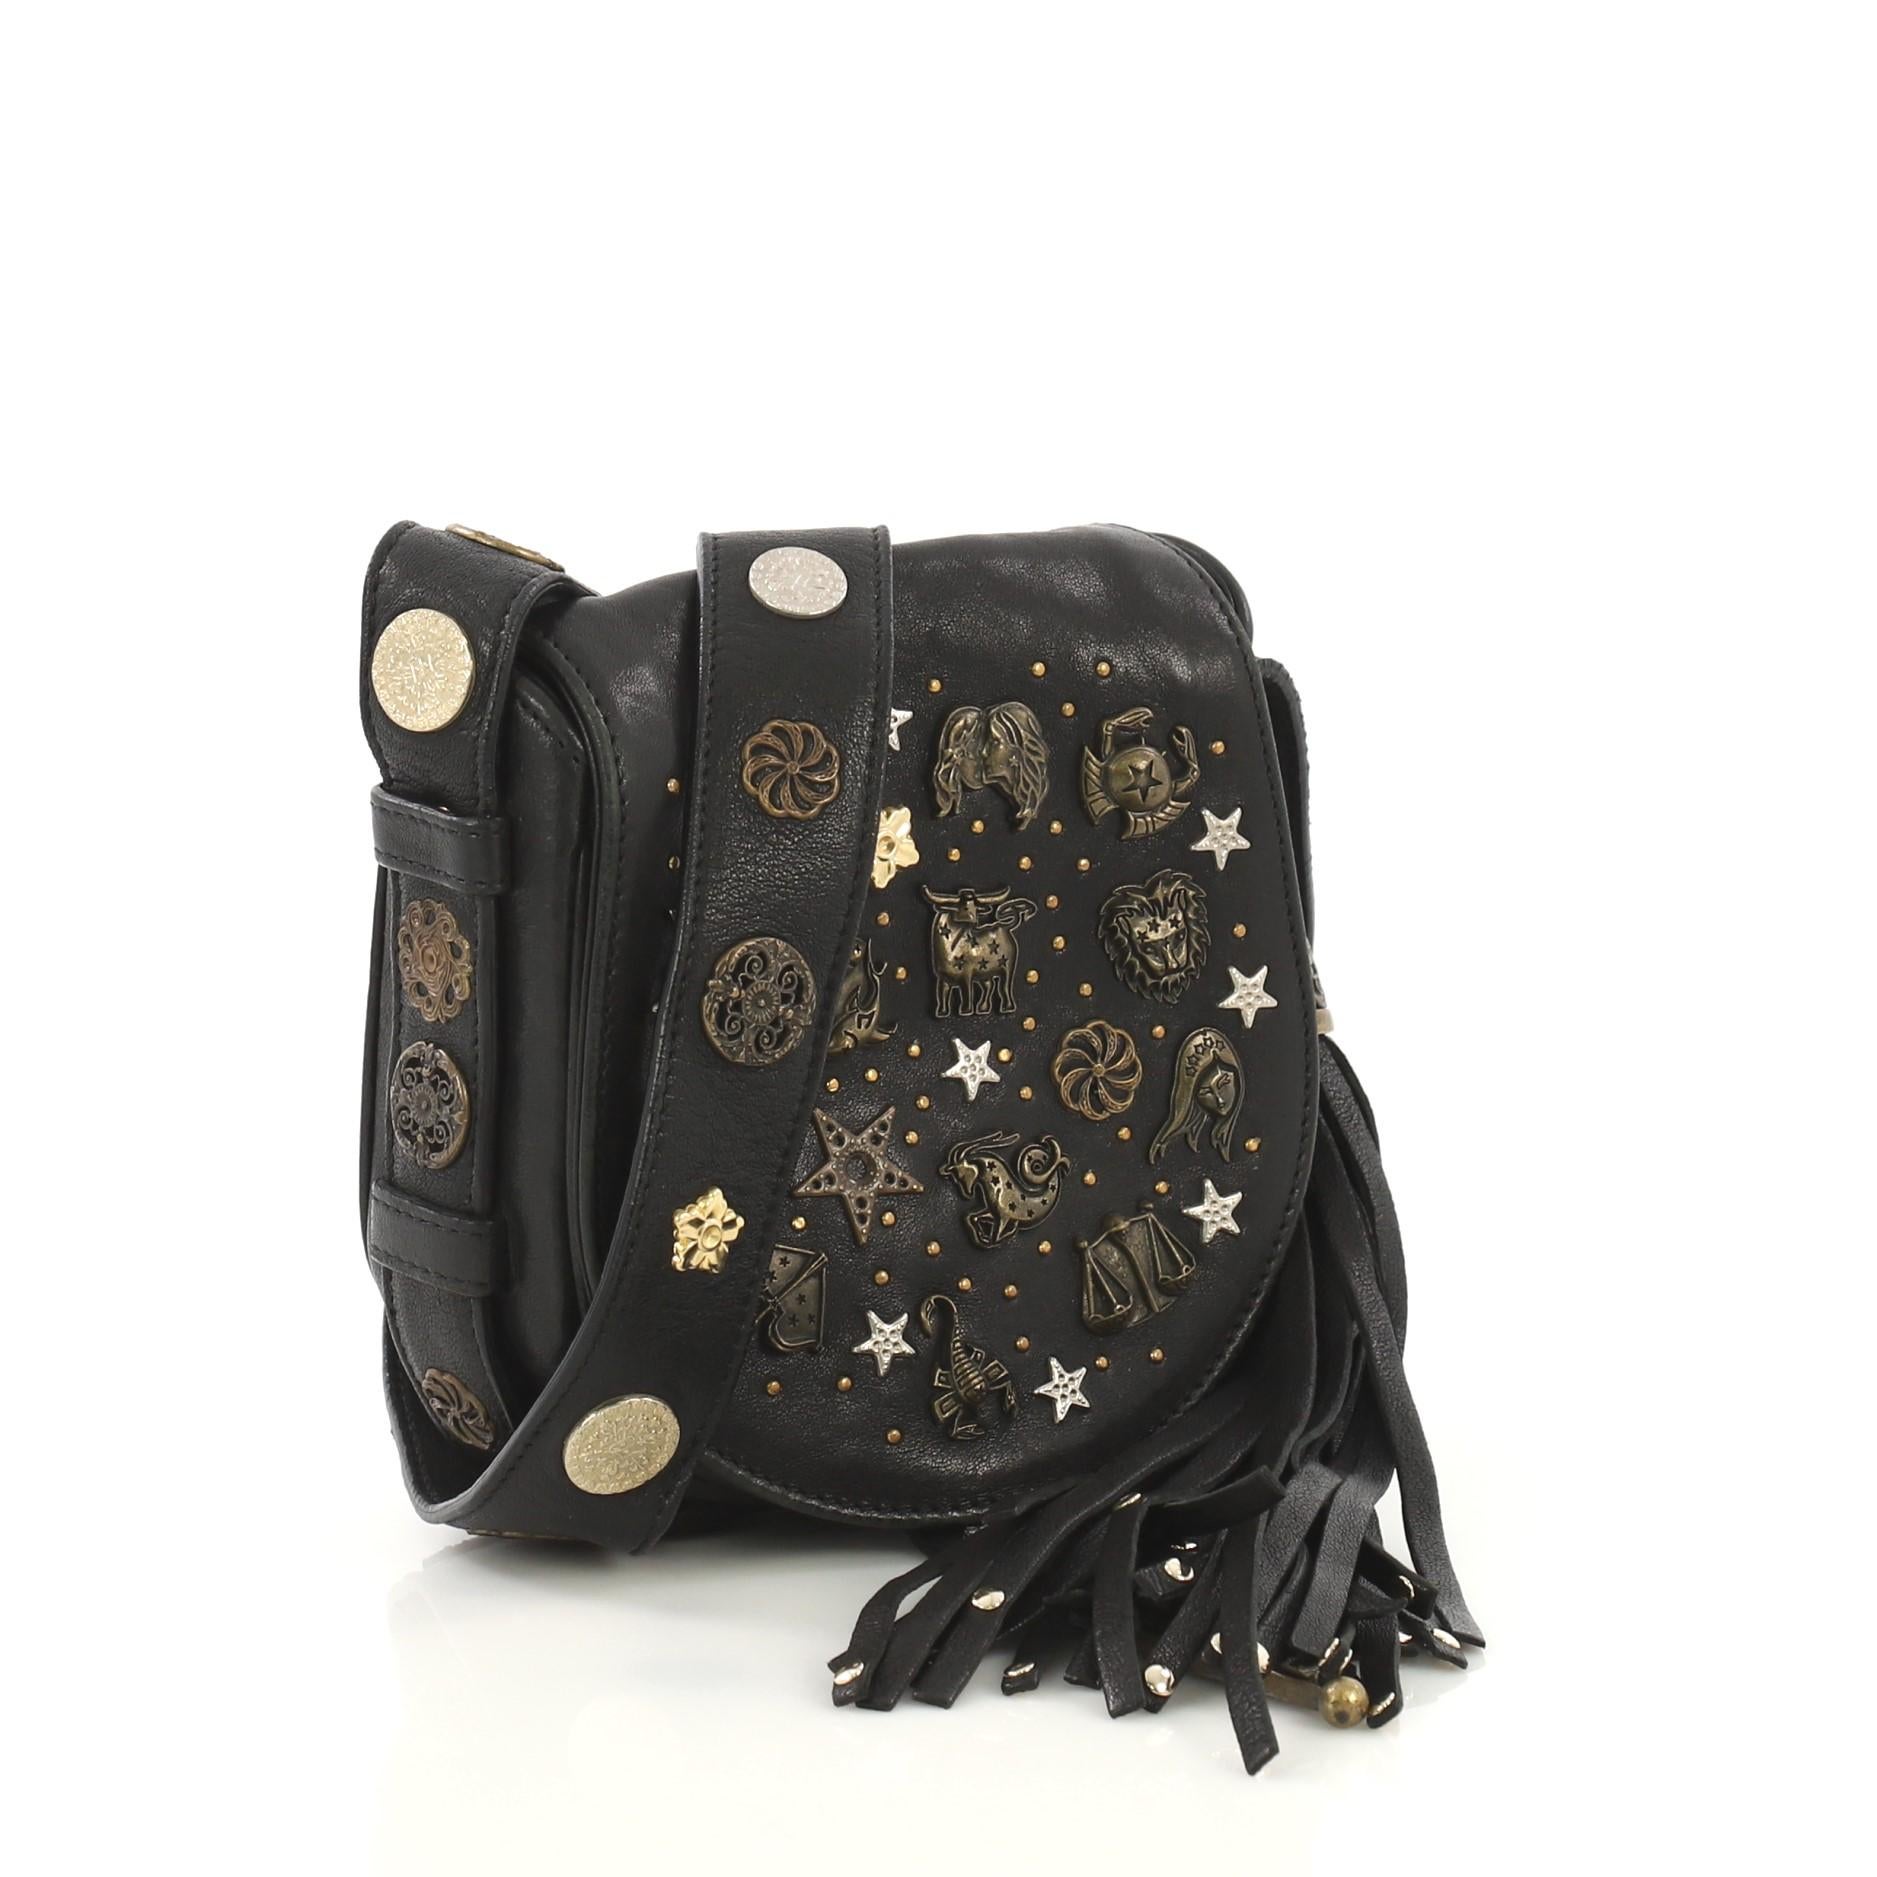 This Jimmy Choo Zena Crossbody Bag Embellished Leather Small, crafted from black embellished leather, features metal embellishment of zodiac signs, stars and moon, long leather strap, oversized tassel, and aged gold, aged silver, and brass-tone